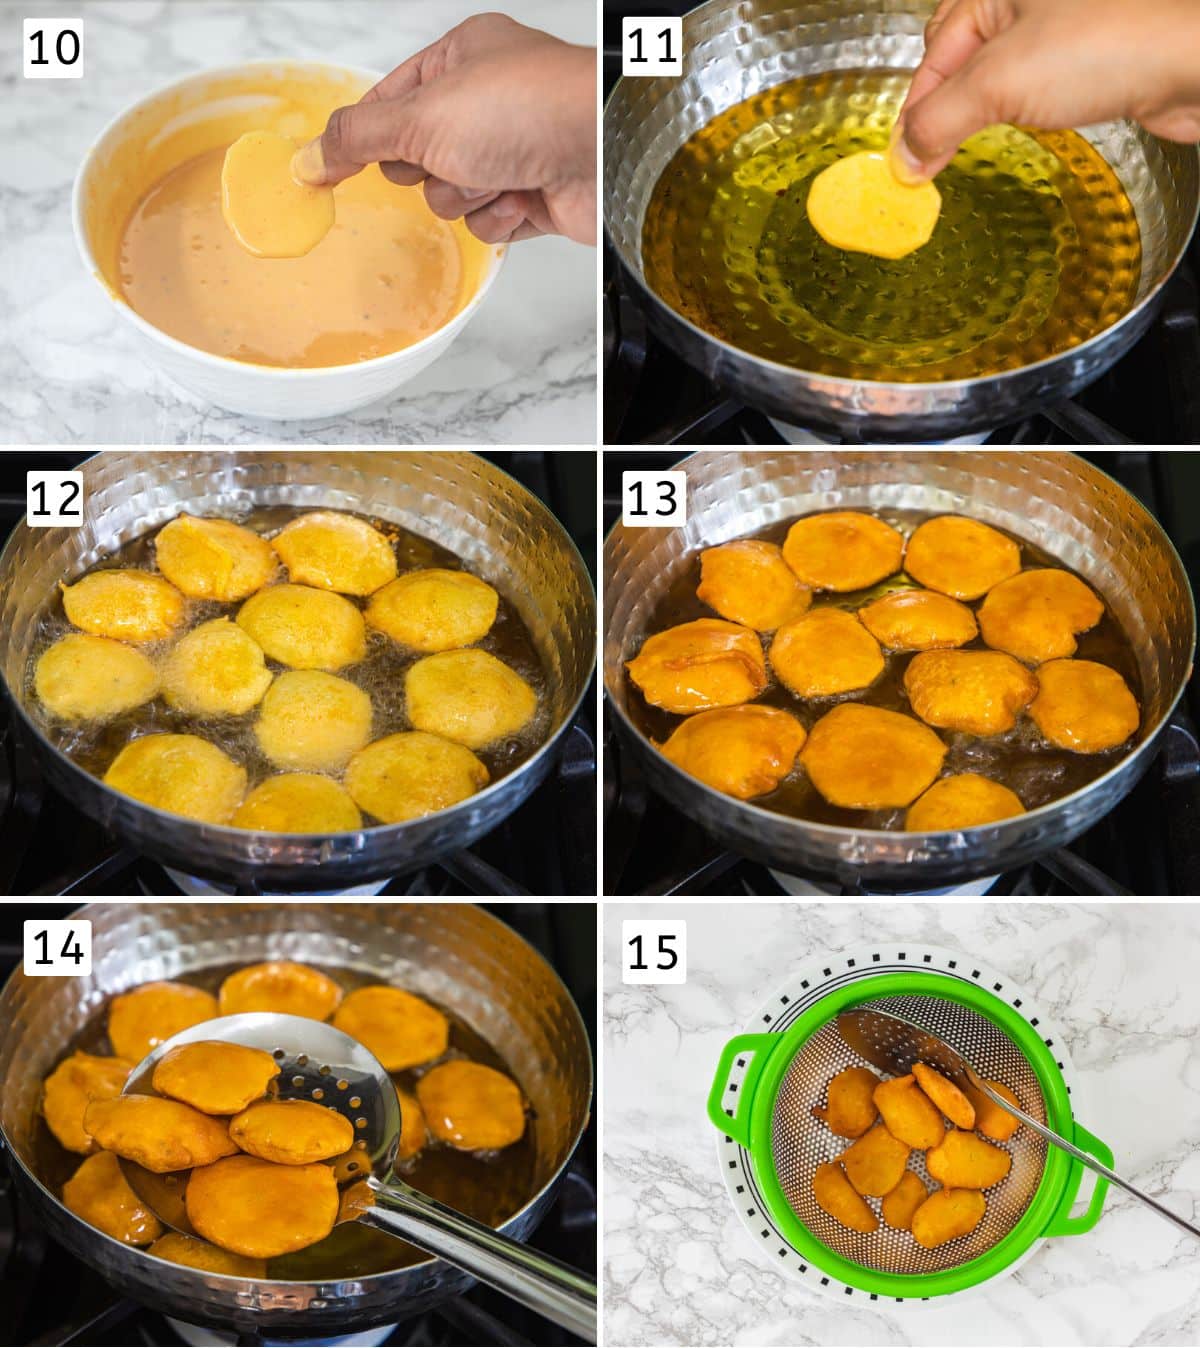 Collage of 6 images showing dipping potato slice into a batter and frying into the oil, removed to a strainer.